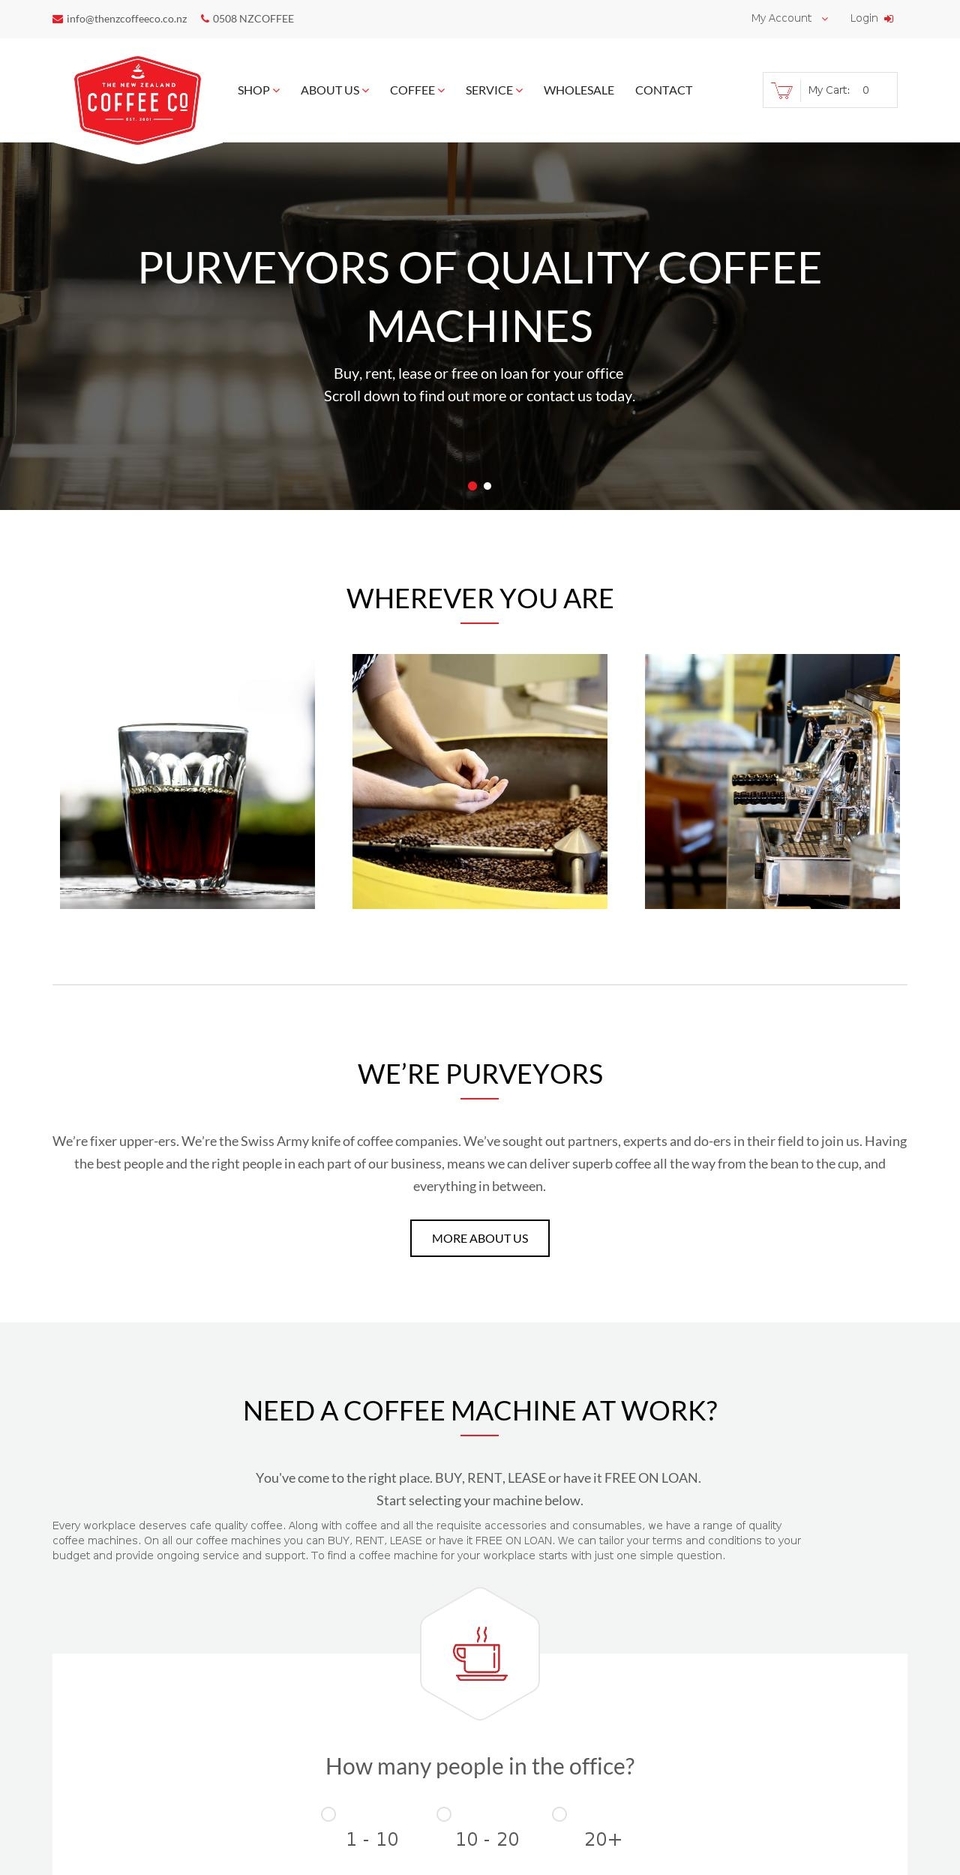 mozar Shopify theme site example coffeesystems.co.nz